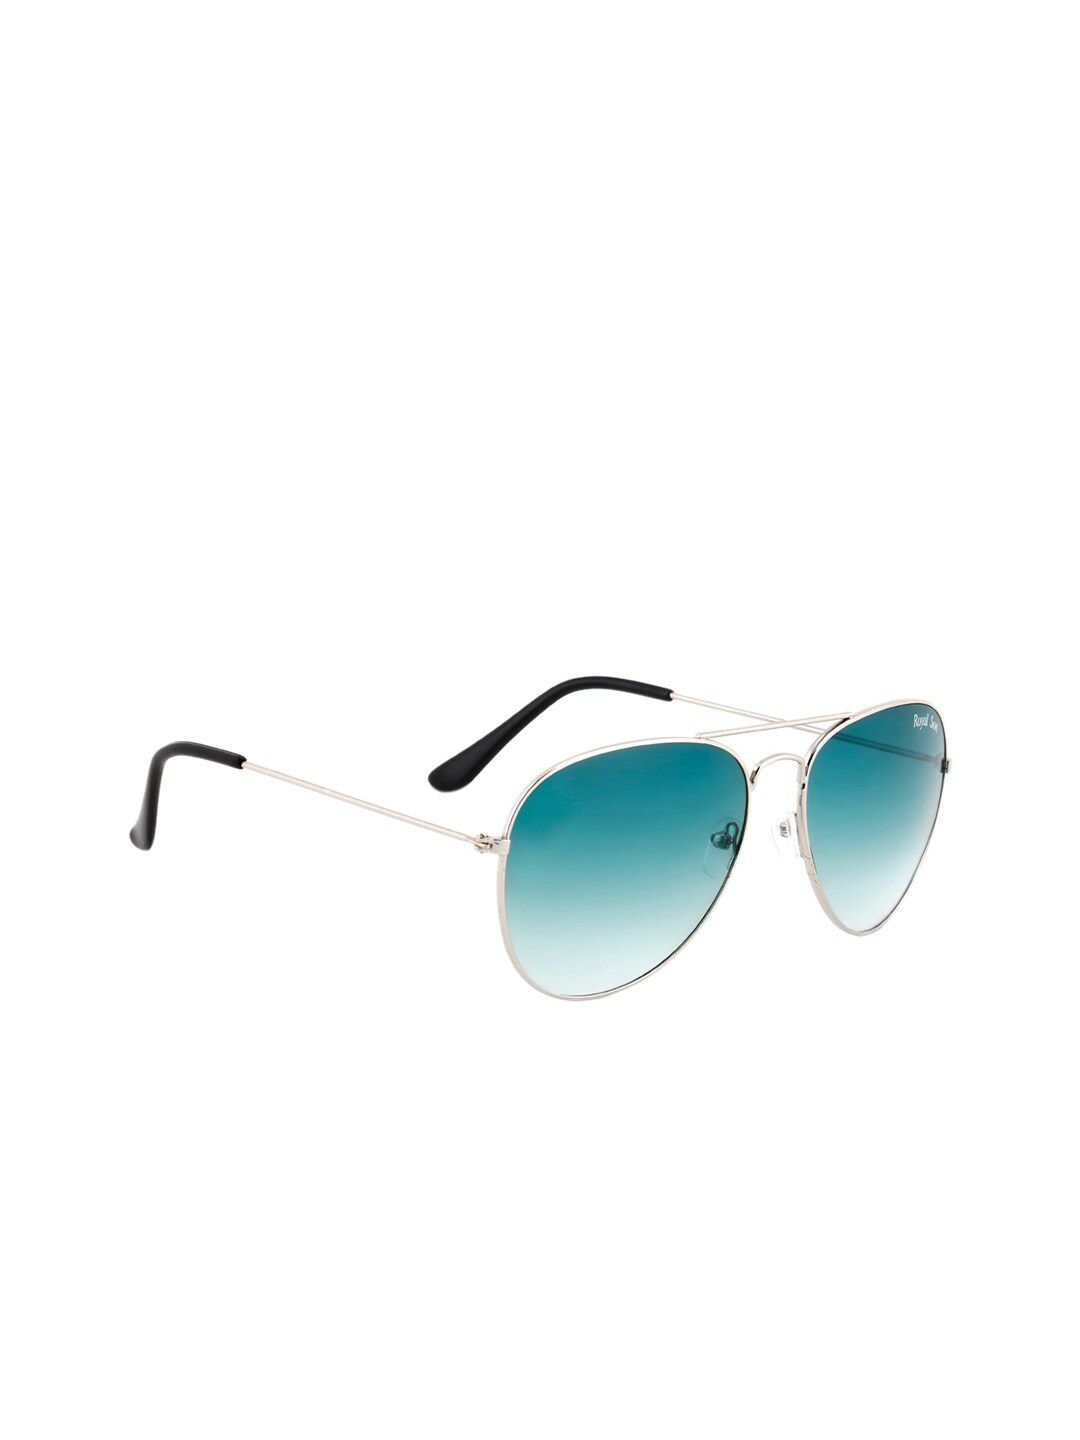 ROYAL SON Unisex Green Lens & Silver-Toned Aviator Sunglasses with UV Protected Lens Price in India